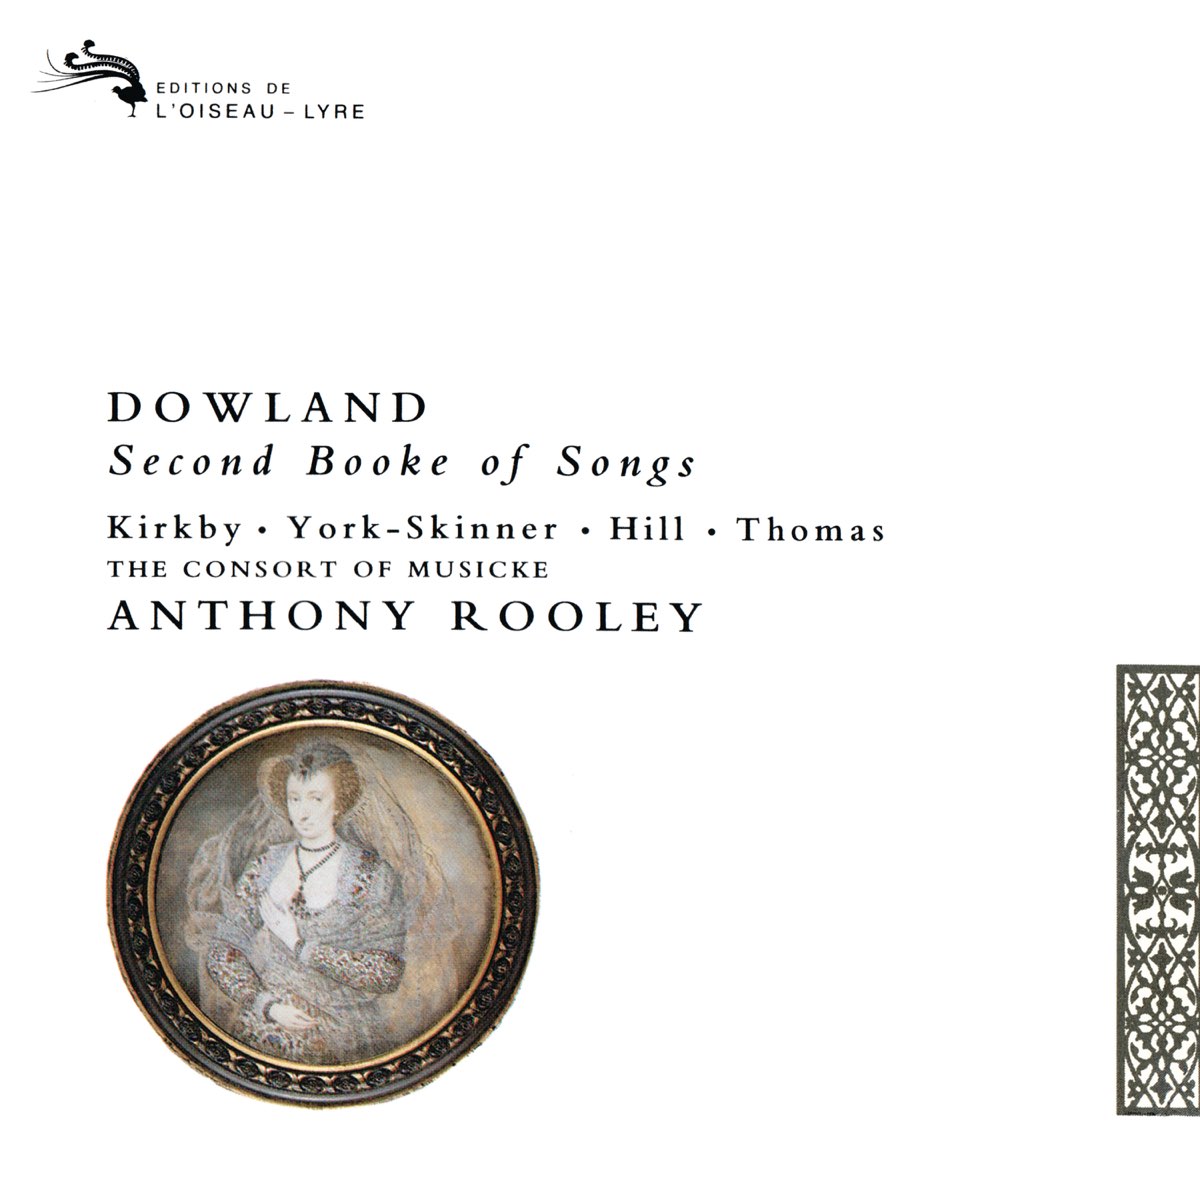 Apple Music 上consort Of Musicke Anthony Rooley的专辑 Dowland Second Booke Of Songs